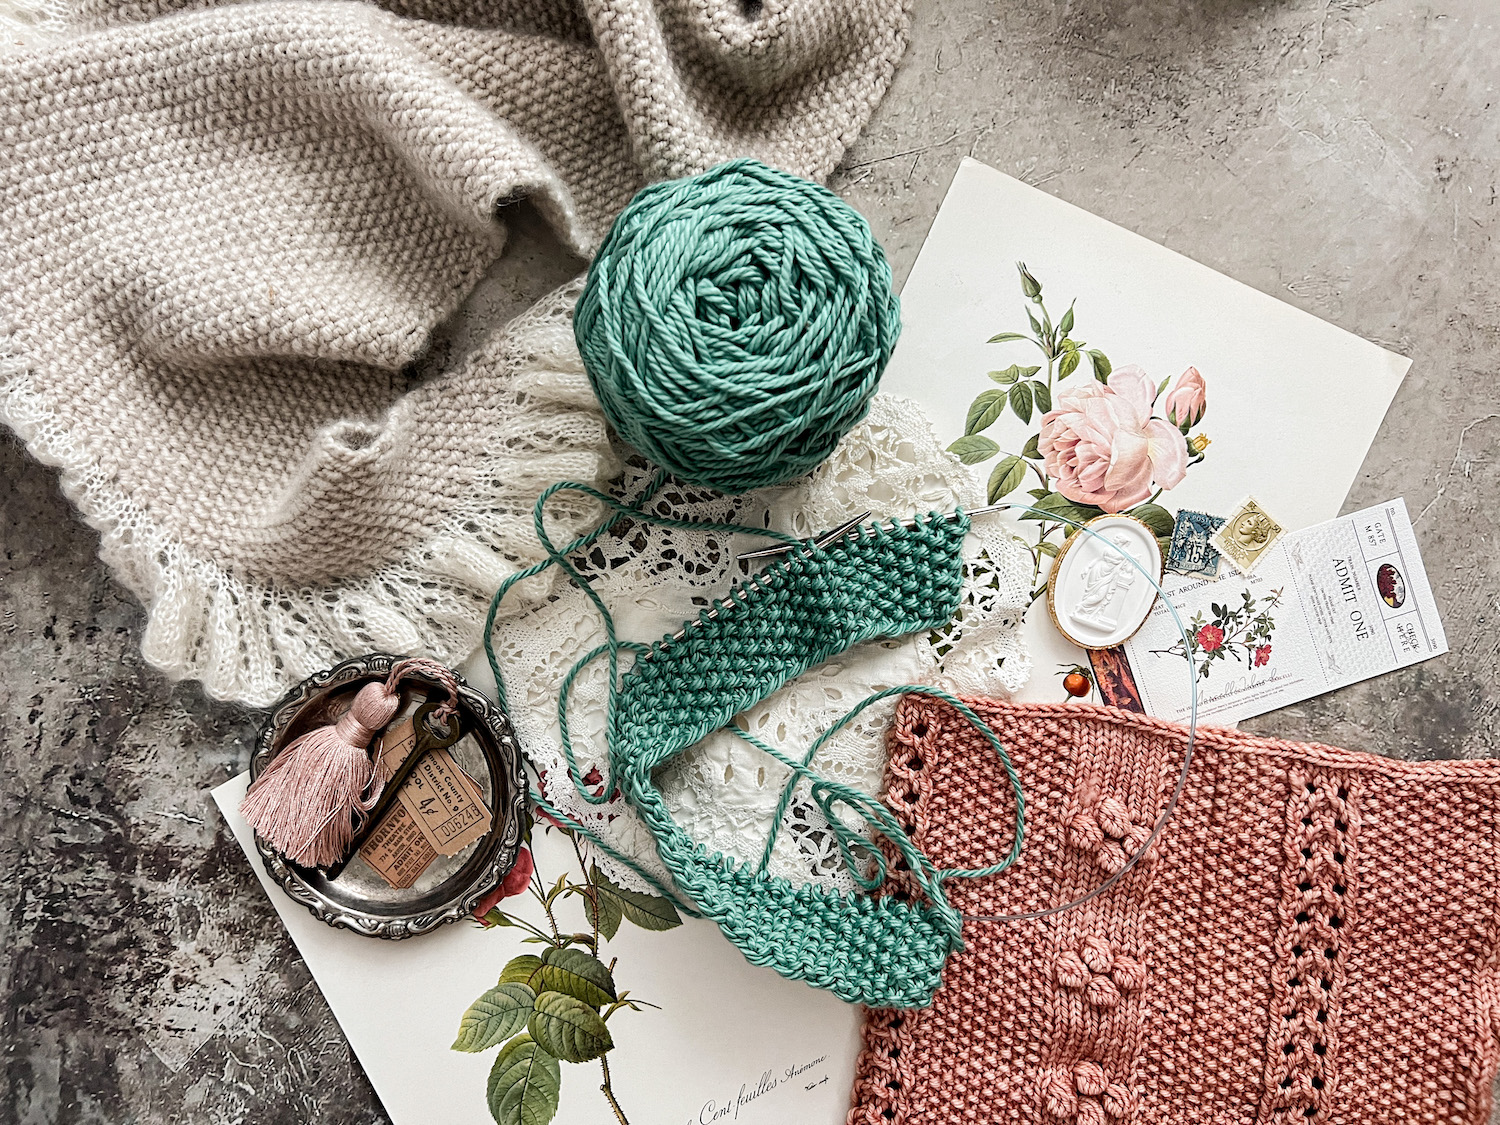 A horizontal photo showing three projects made with seed stitch: a gray shawl at top left, a pink cowl at bottom right, and a turquoise dishcloth in progress in the middle. they're surrounded by antique paper ephemera and trinkets.